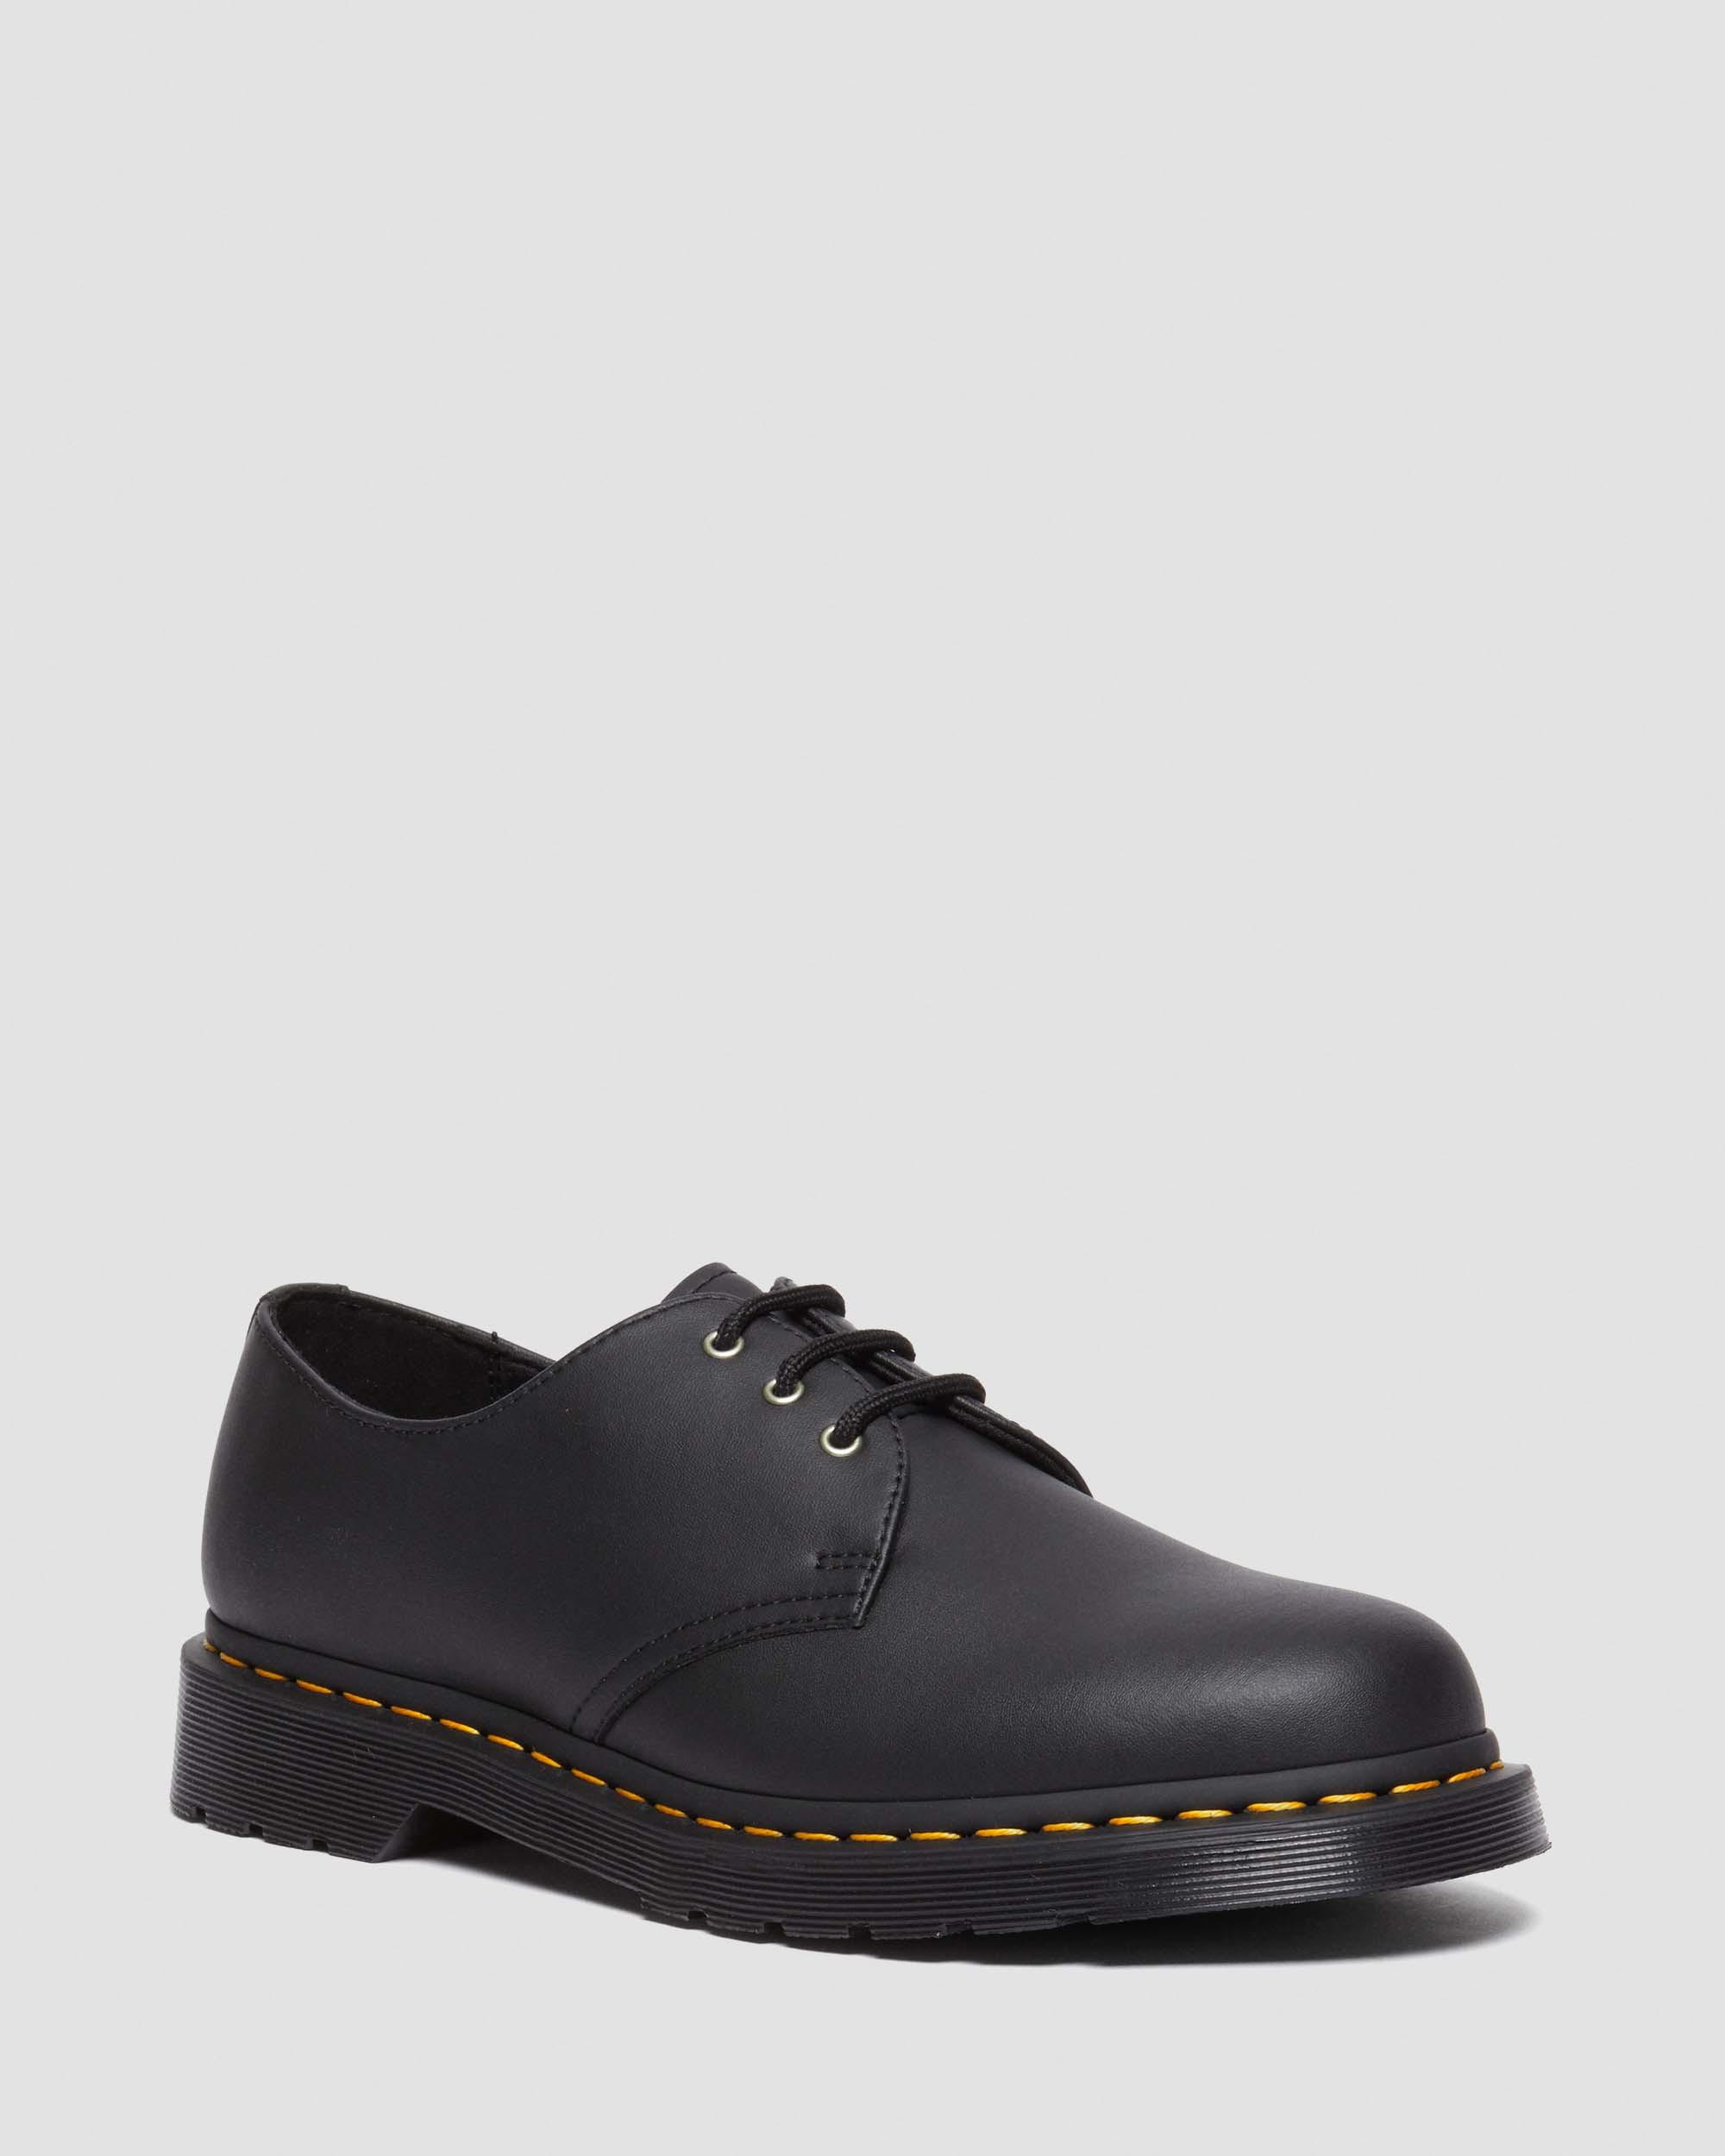 1461 Genix Nappa Reclaimed Leather Oxford Shoes